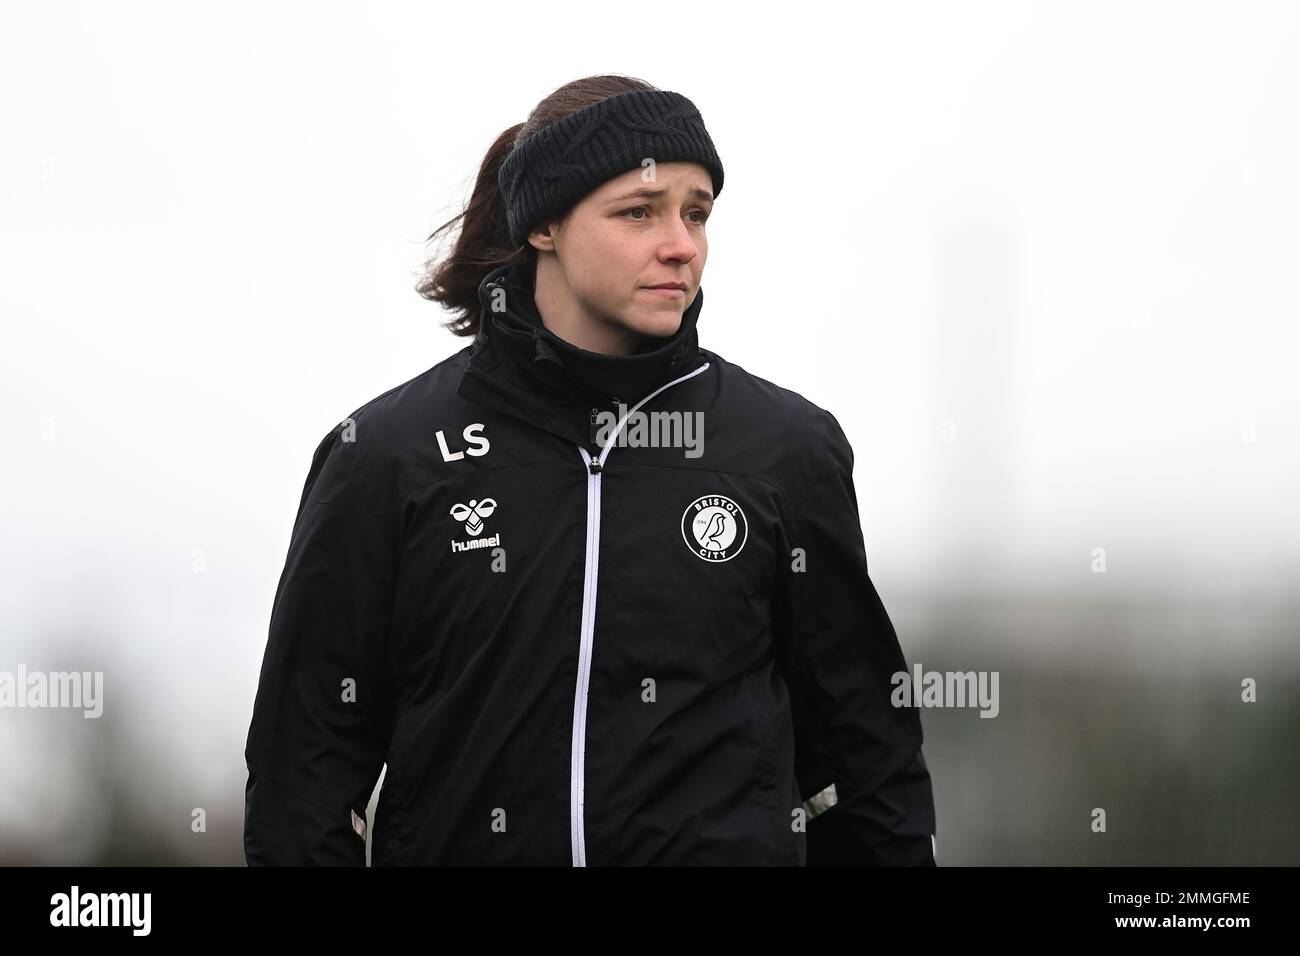 Bristol, UK. 29th January, 2023. Lauren Smith Head Coach of Bristol City Women  - Mandatory by-line: Ashley Crowden  - 29/01/2023 - FOOTBALL - Robins High Performance Centre - Bristol, England - Bristol City Women vs Oxford United Women - The Women's FA Cup - Fourth Round Credit: Ashley Crowden/Alamy Live News Stock Photo